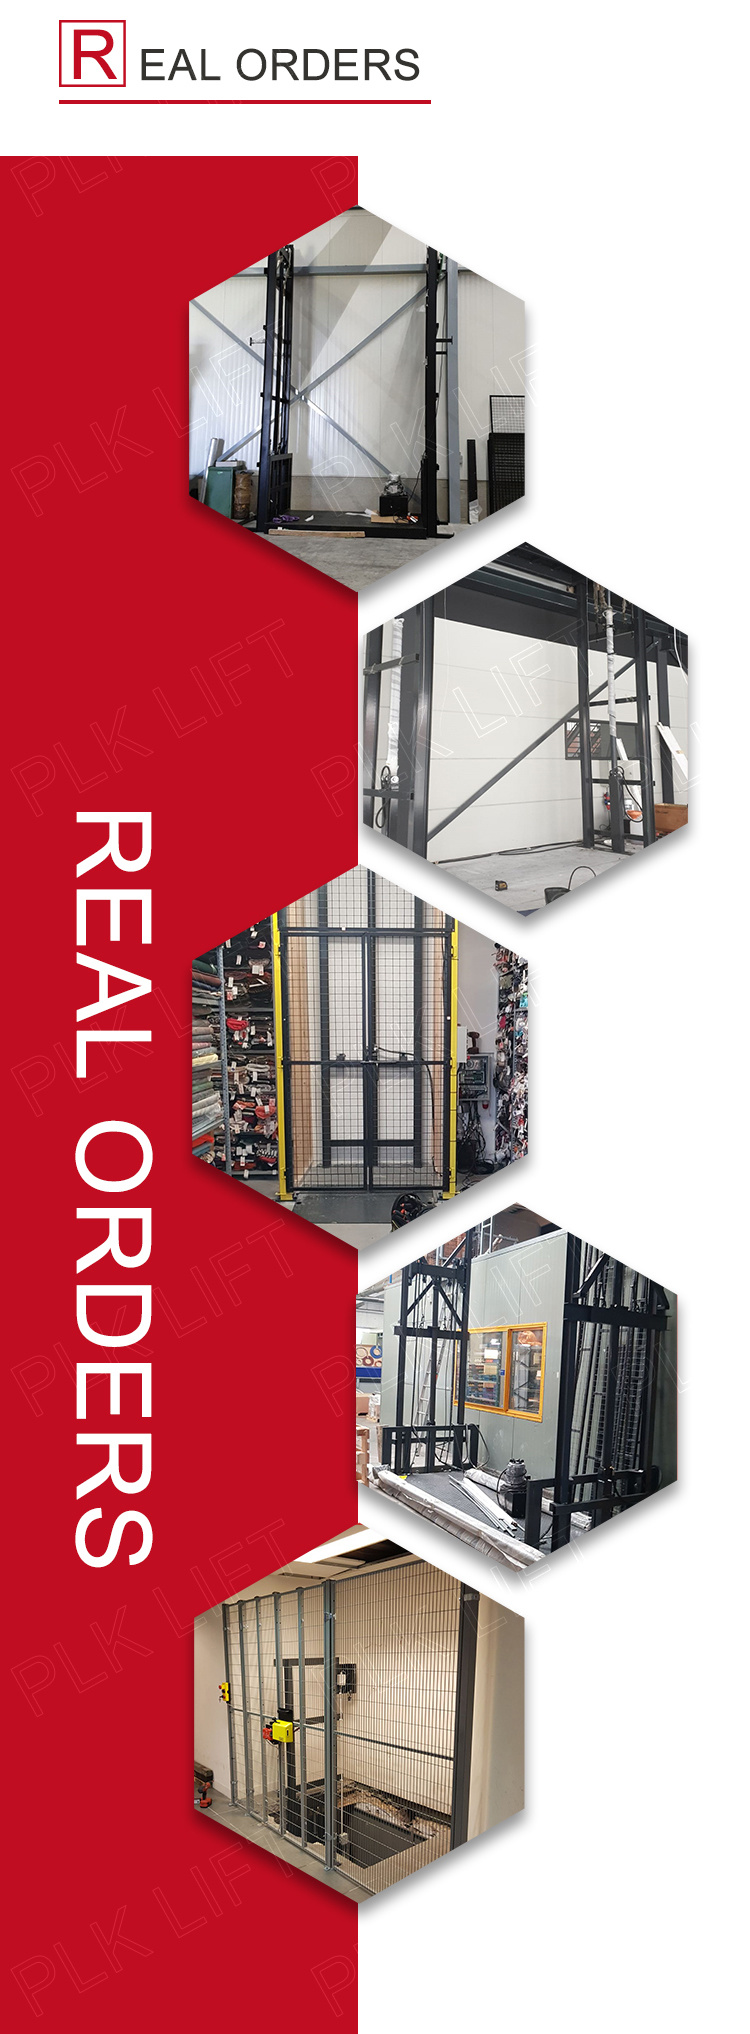 500kg 2000kg Hydraulic Electric Industrial Material Lift Freight Elevator